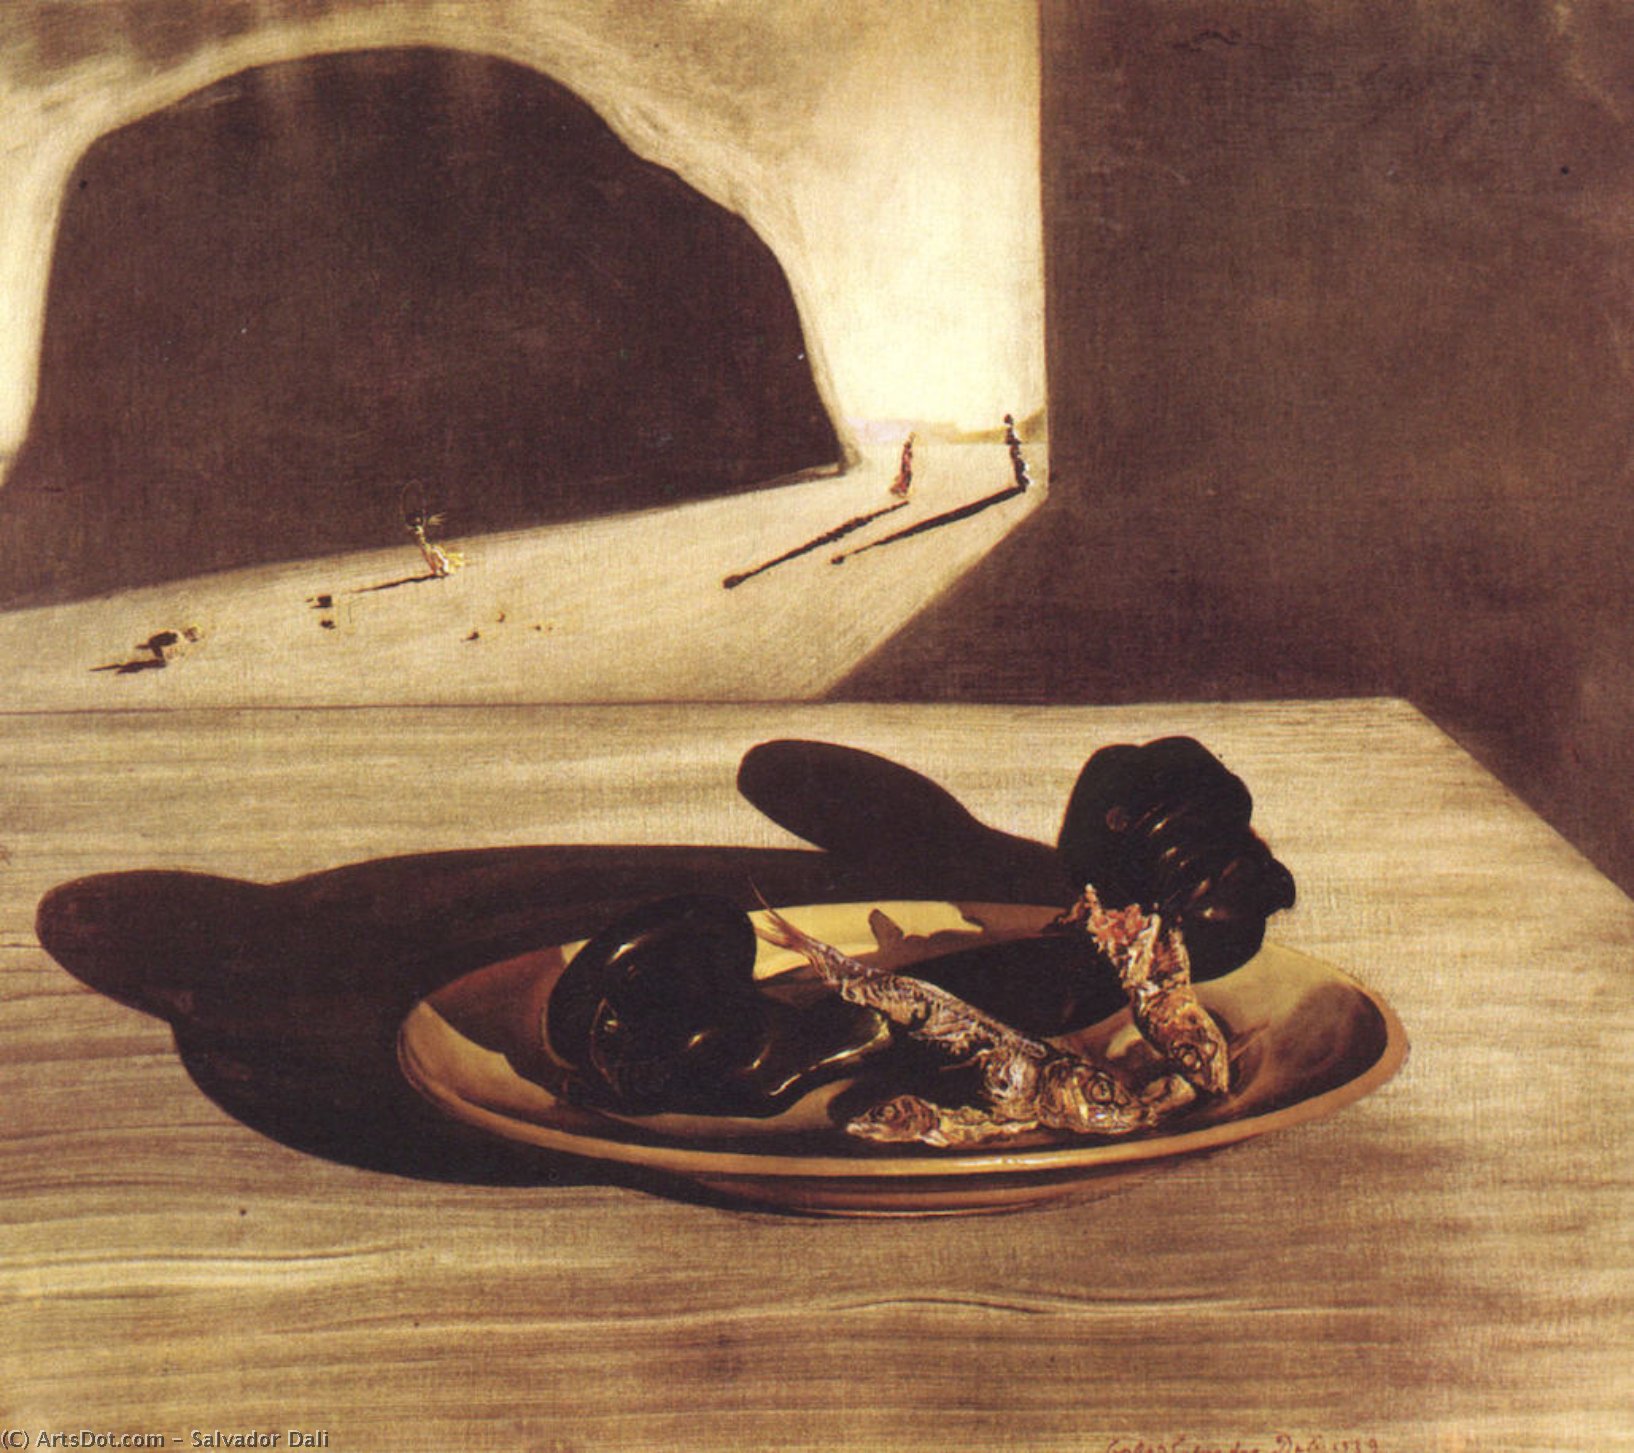 WikiOO.org - دایره المعارف هنرهای زیبا - نقاشی، آثار هنری Salvador Dali - Telephone in a Dish With Three Grilled Sardines at the End of September, 1939